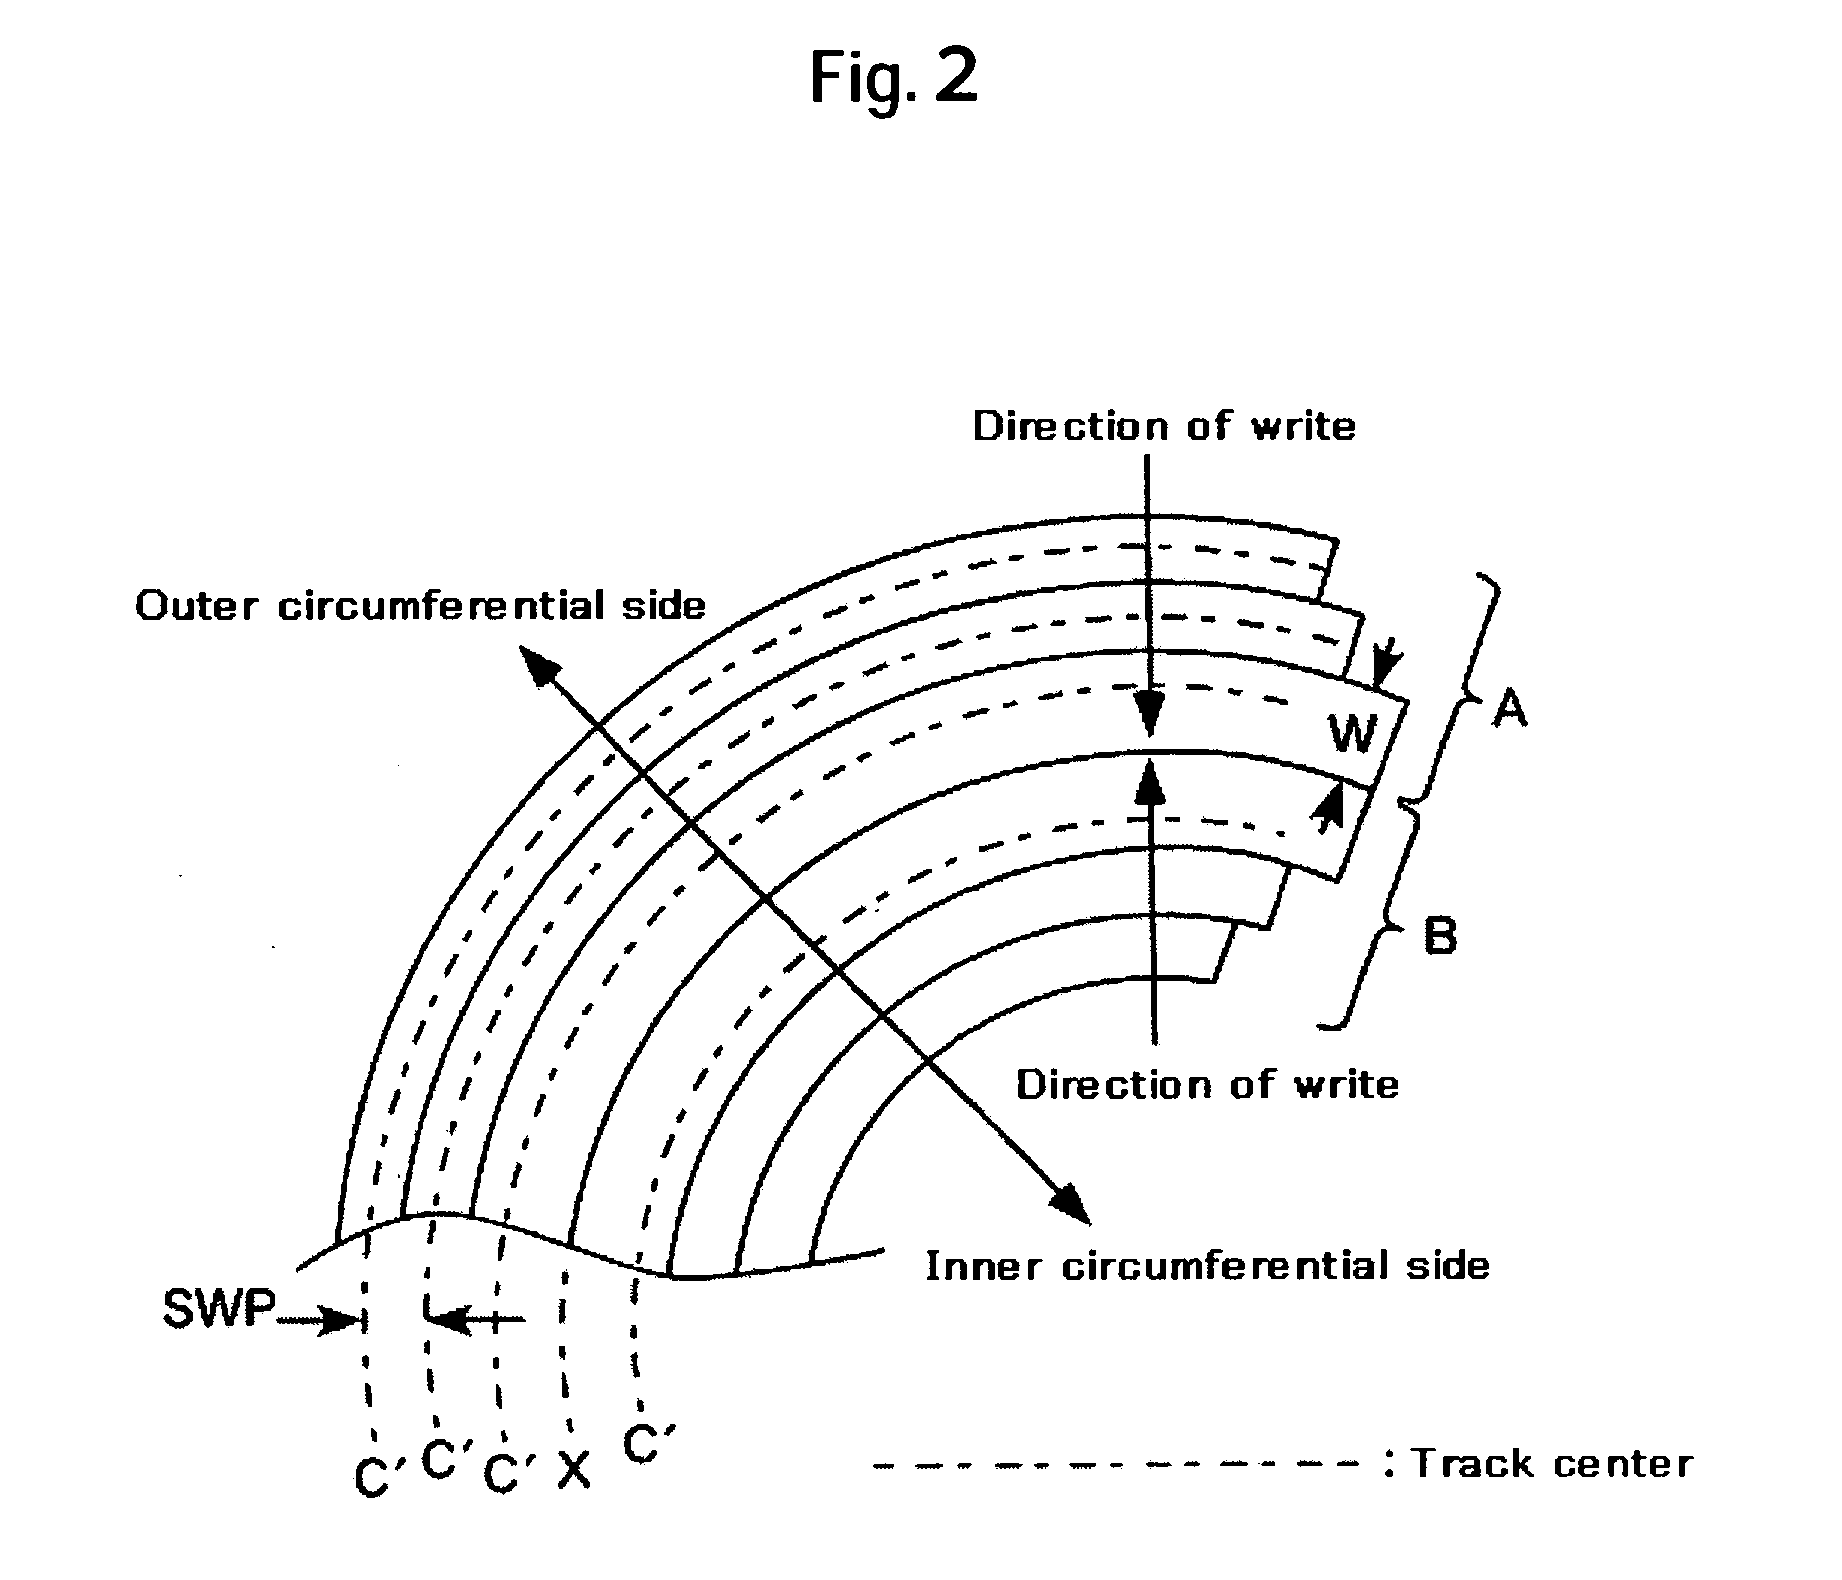 Disk drive with enhanced storage capacity increase ratio